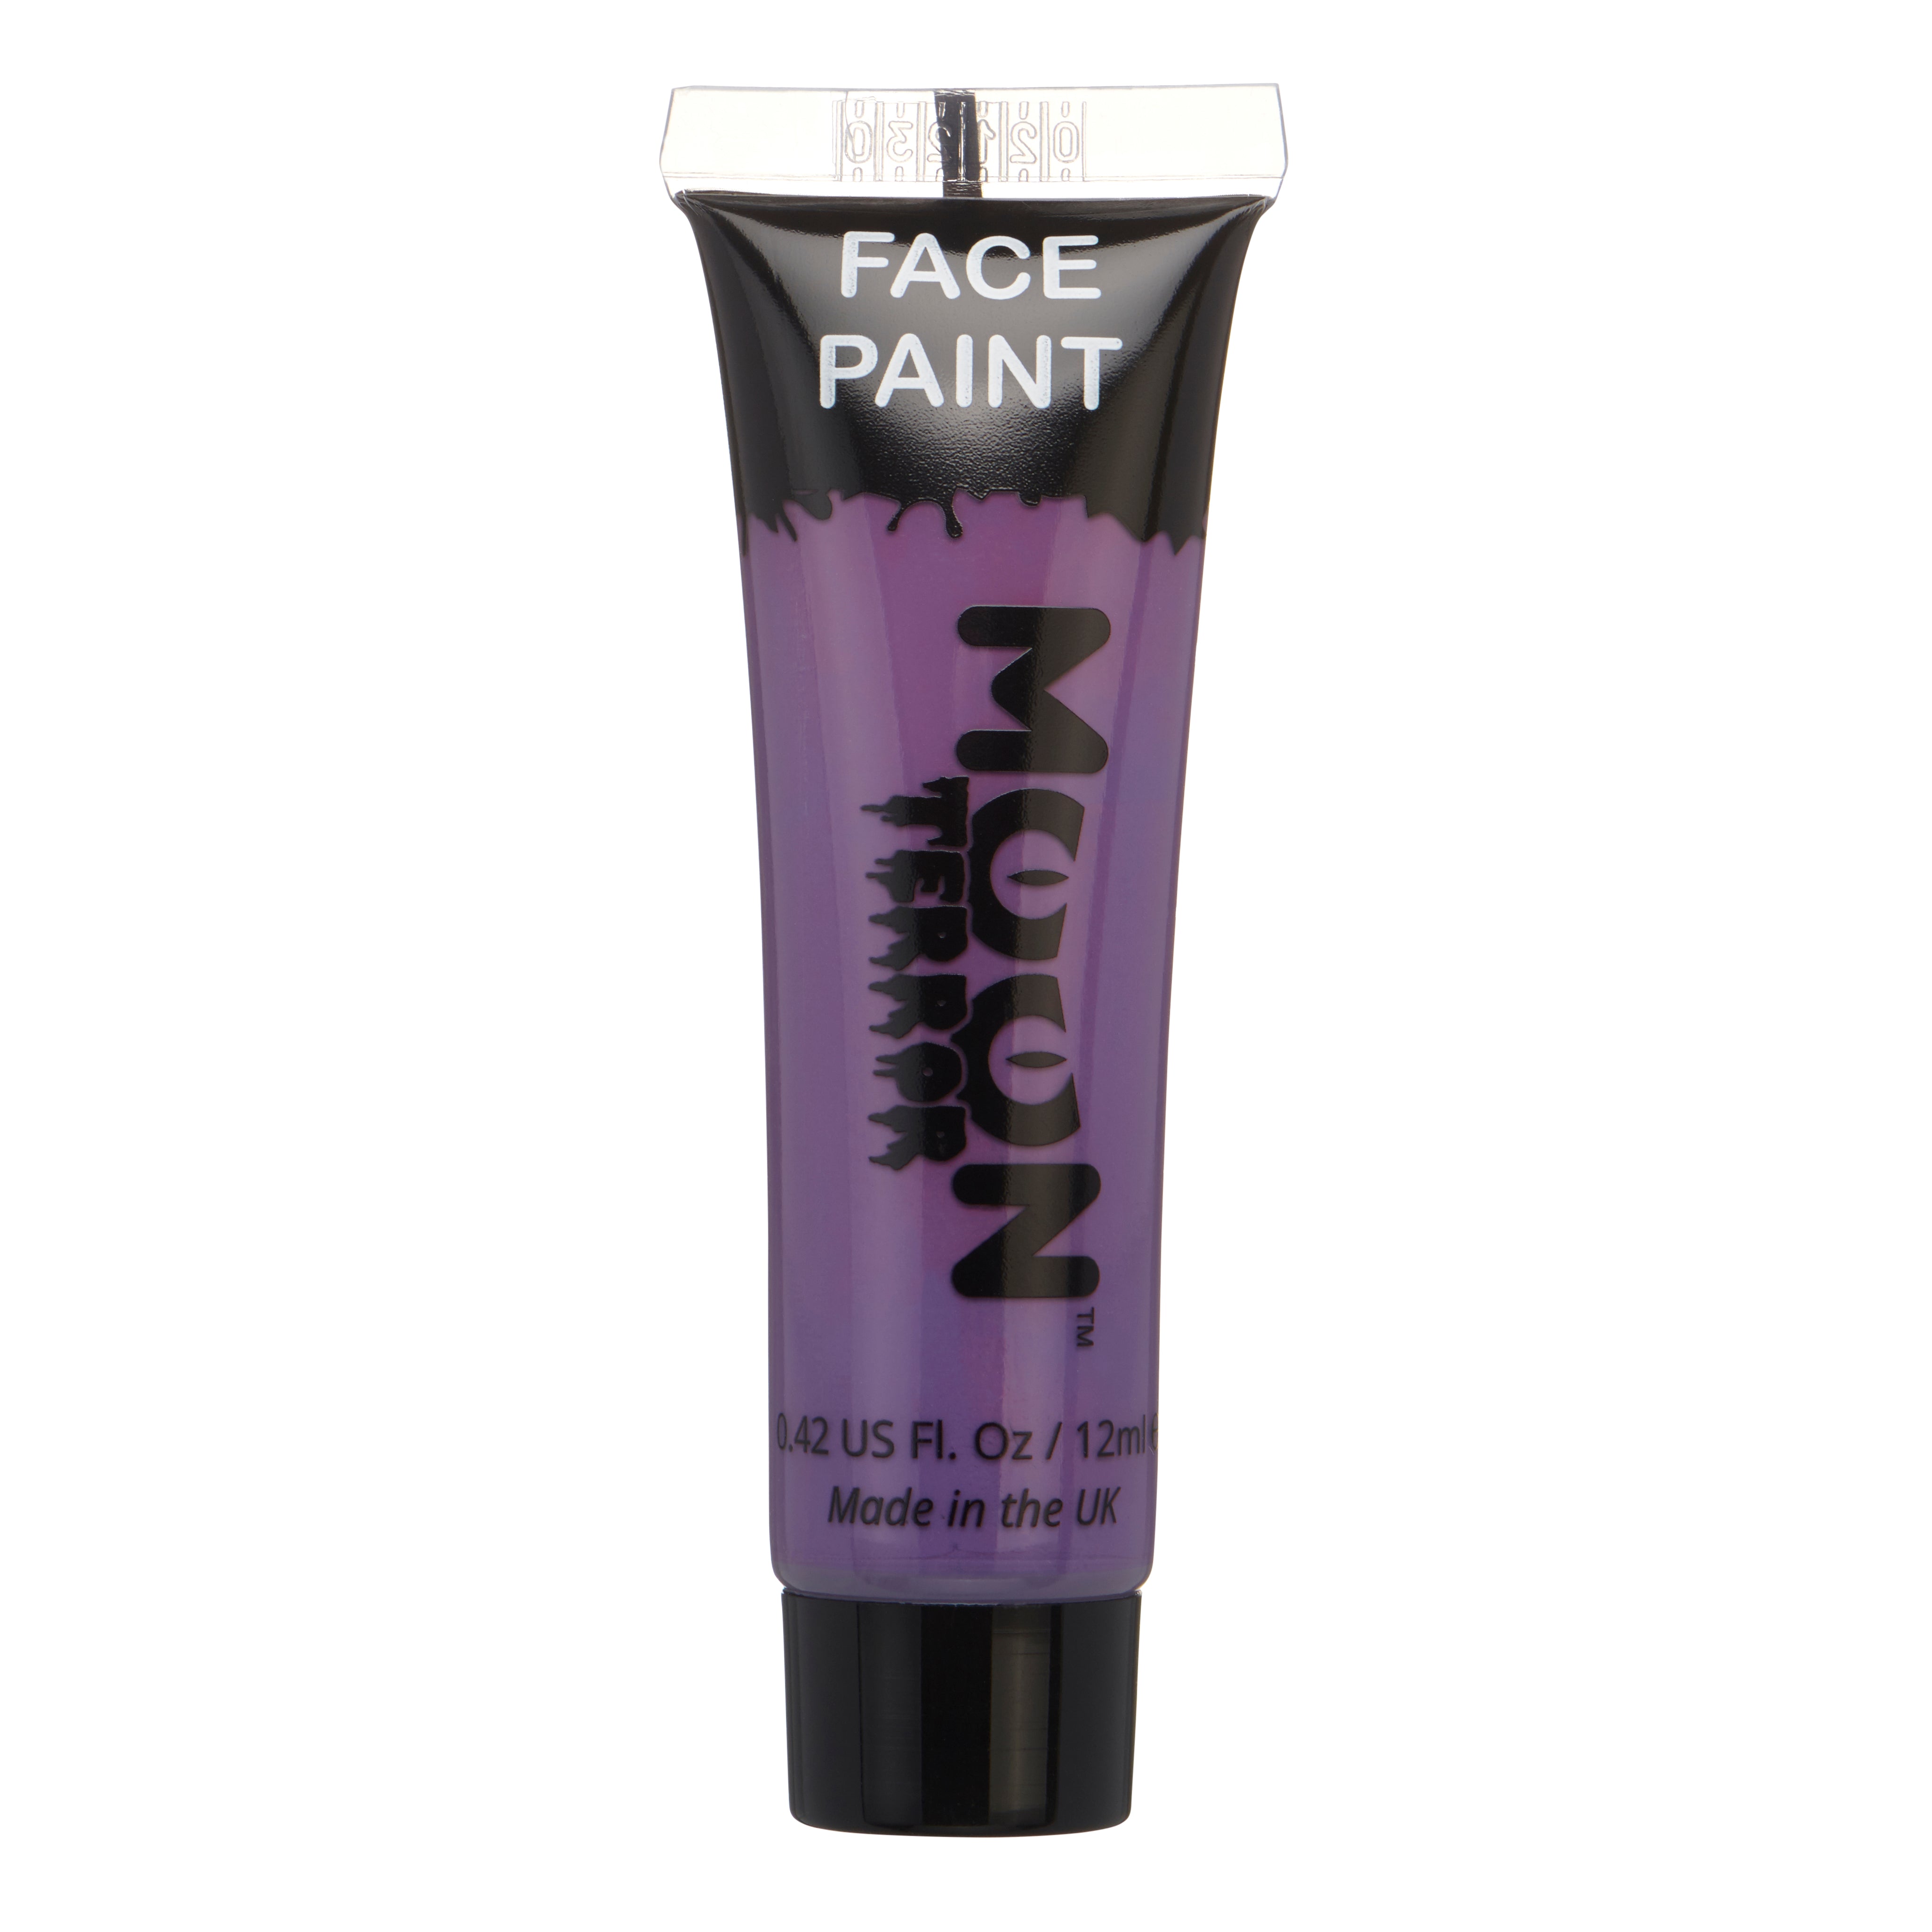 Poison Purple - Terror Face & Body Paint Makeup, 12mL. Cosmetically certified, FDA & Health Canada compliant, cruelty free and vegan.